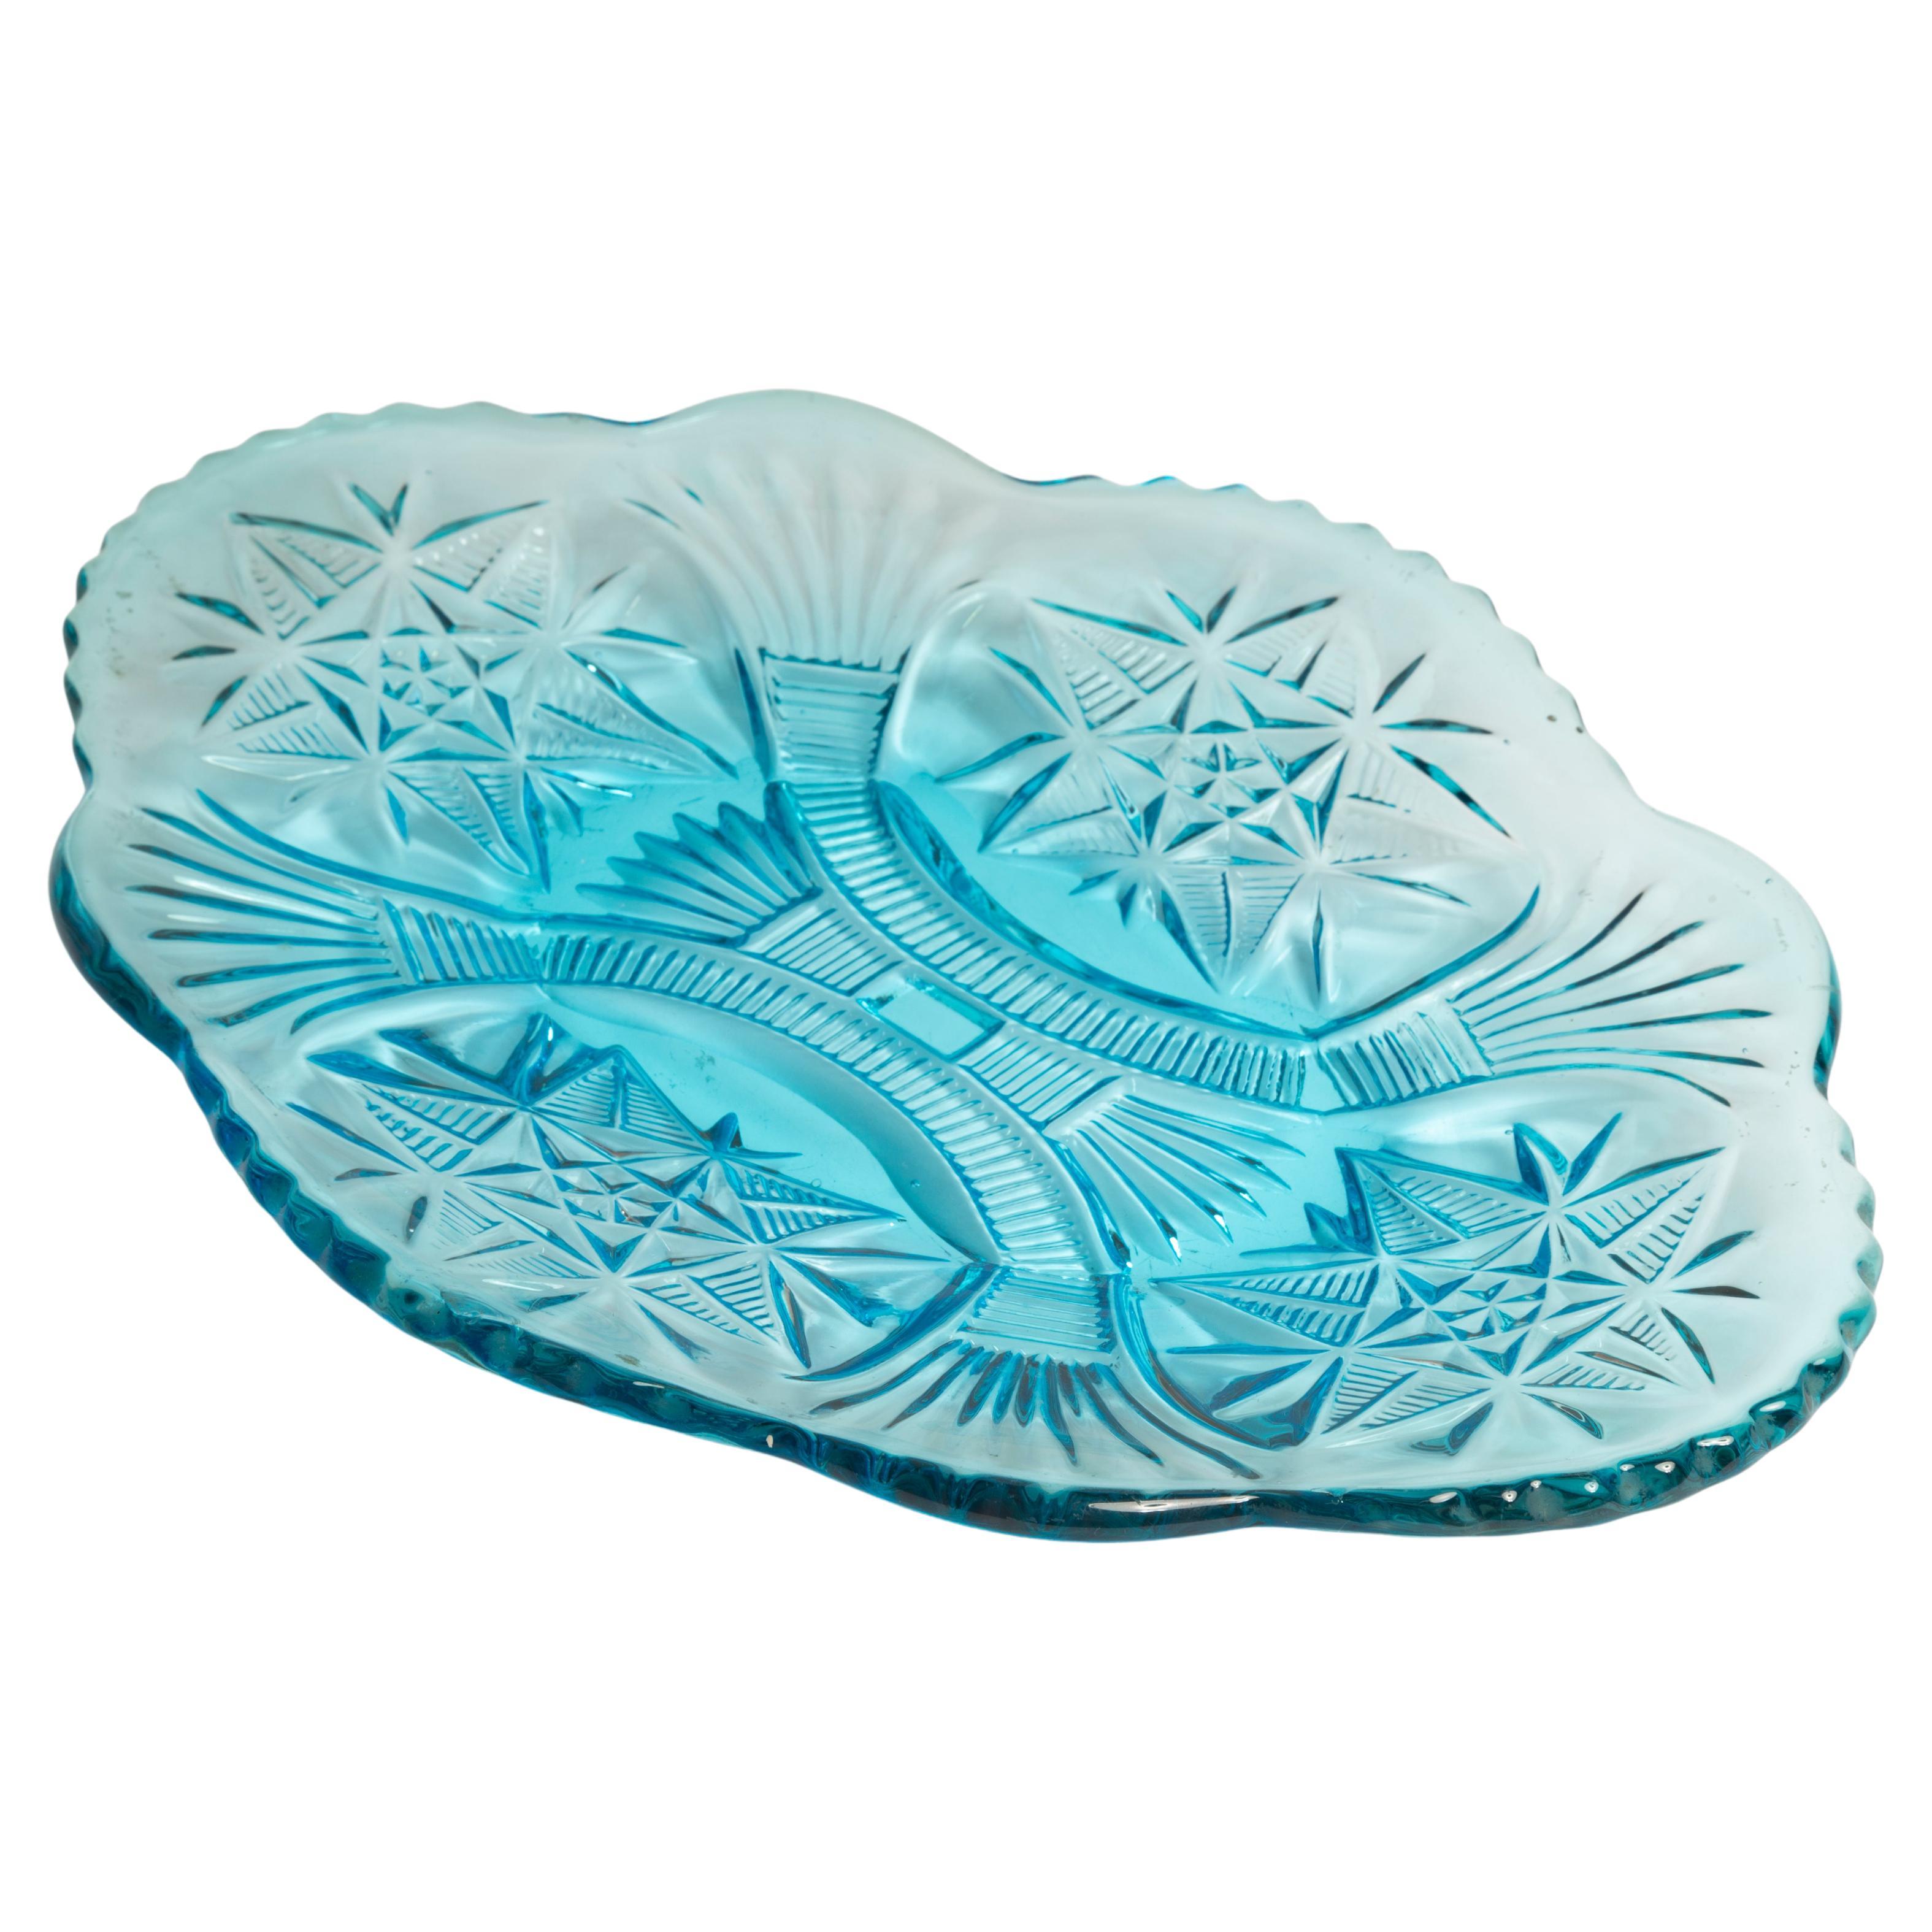 Midcentury Light Blue Decorative Glass Plate, Italy, 1960s For Sale